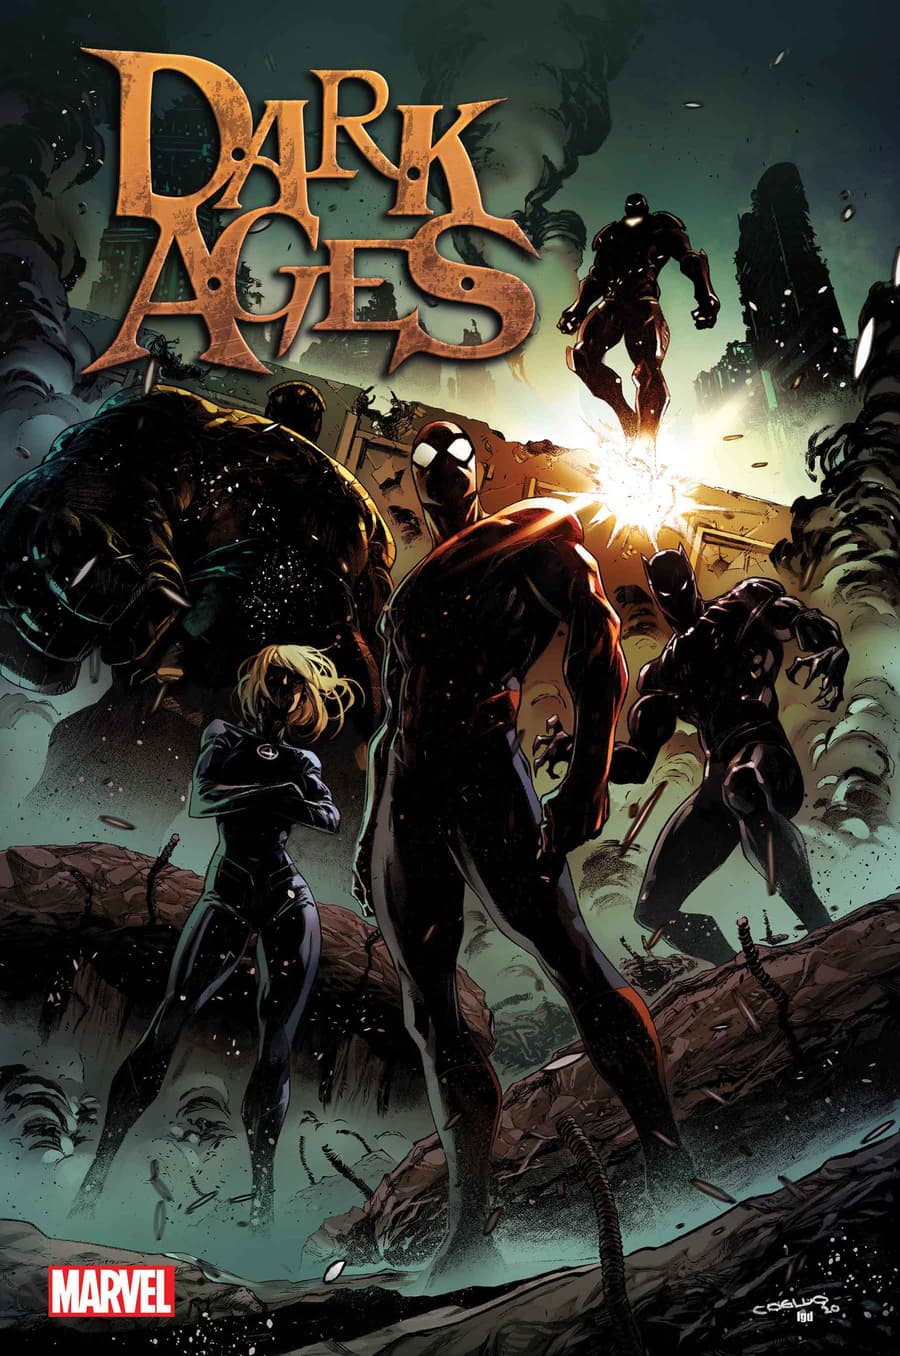 DARK AGES #1 cover by Iban Coello